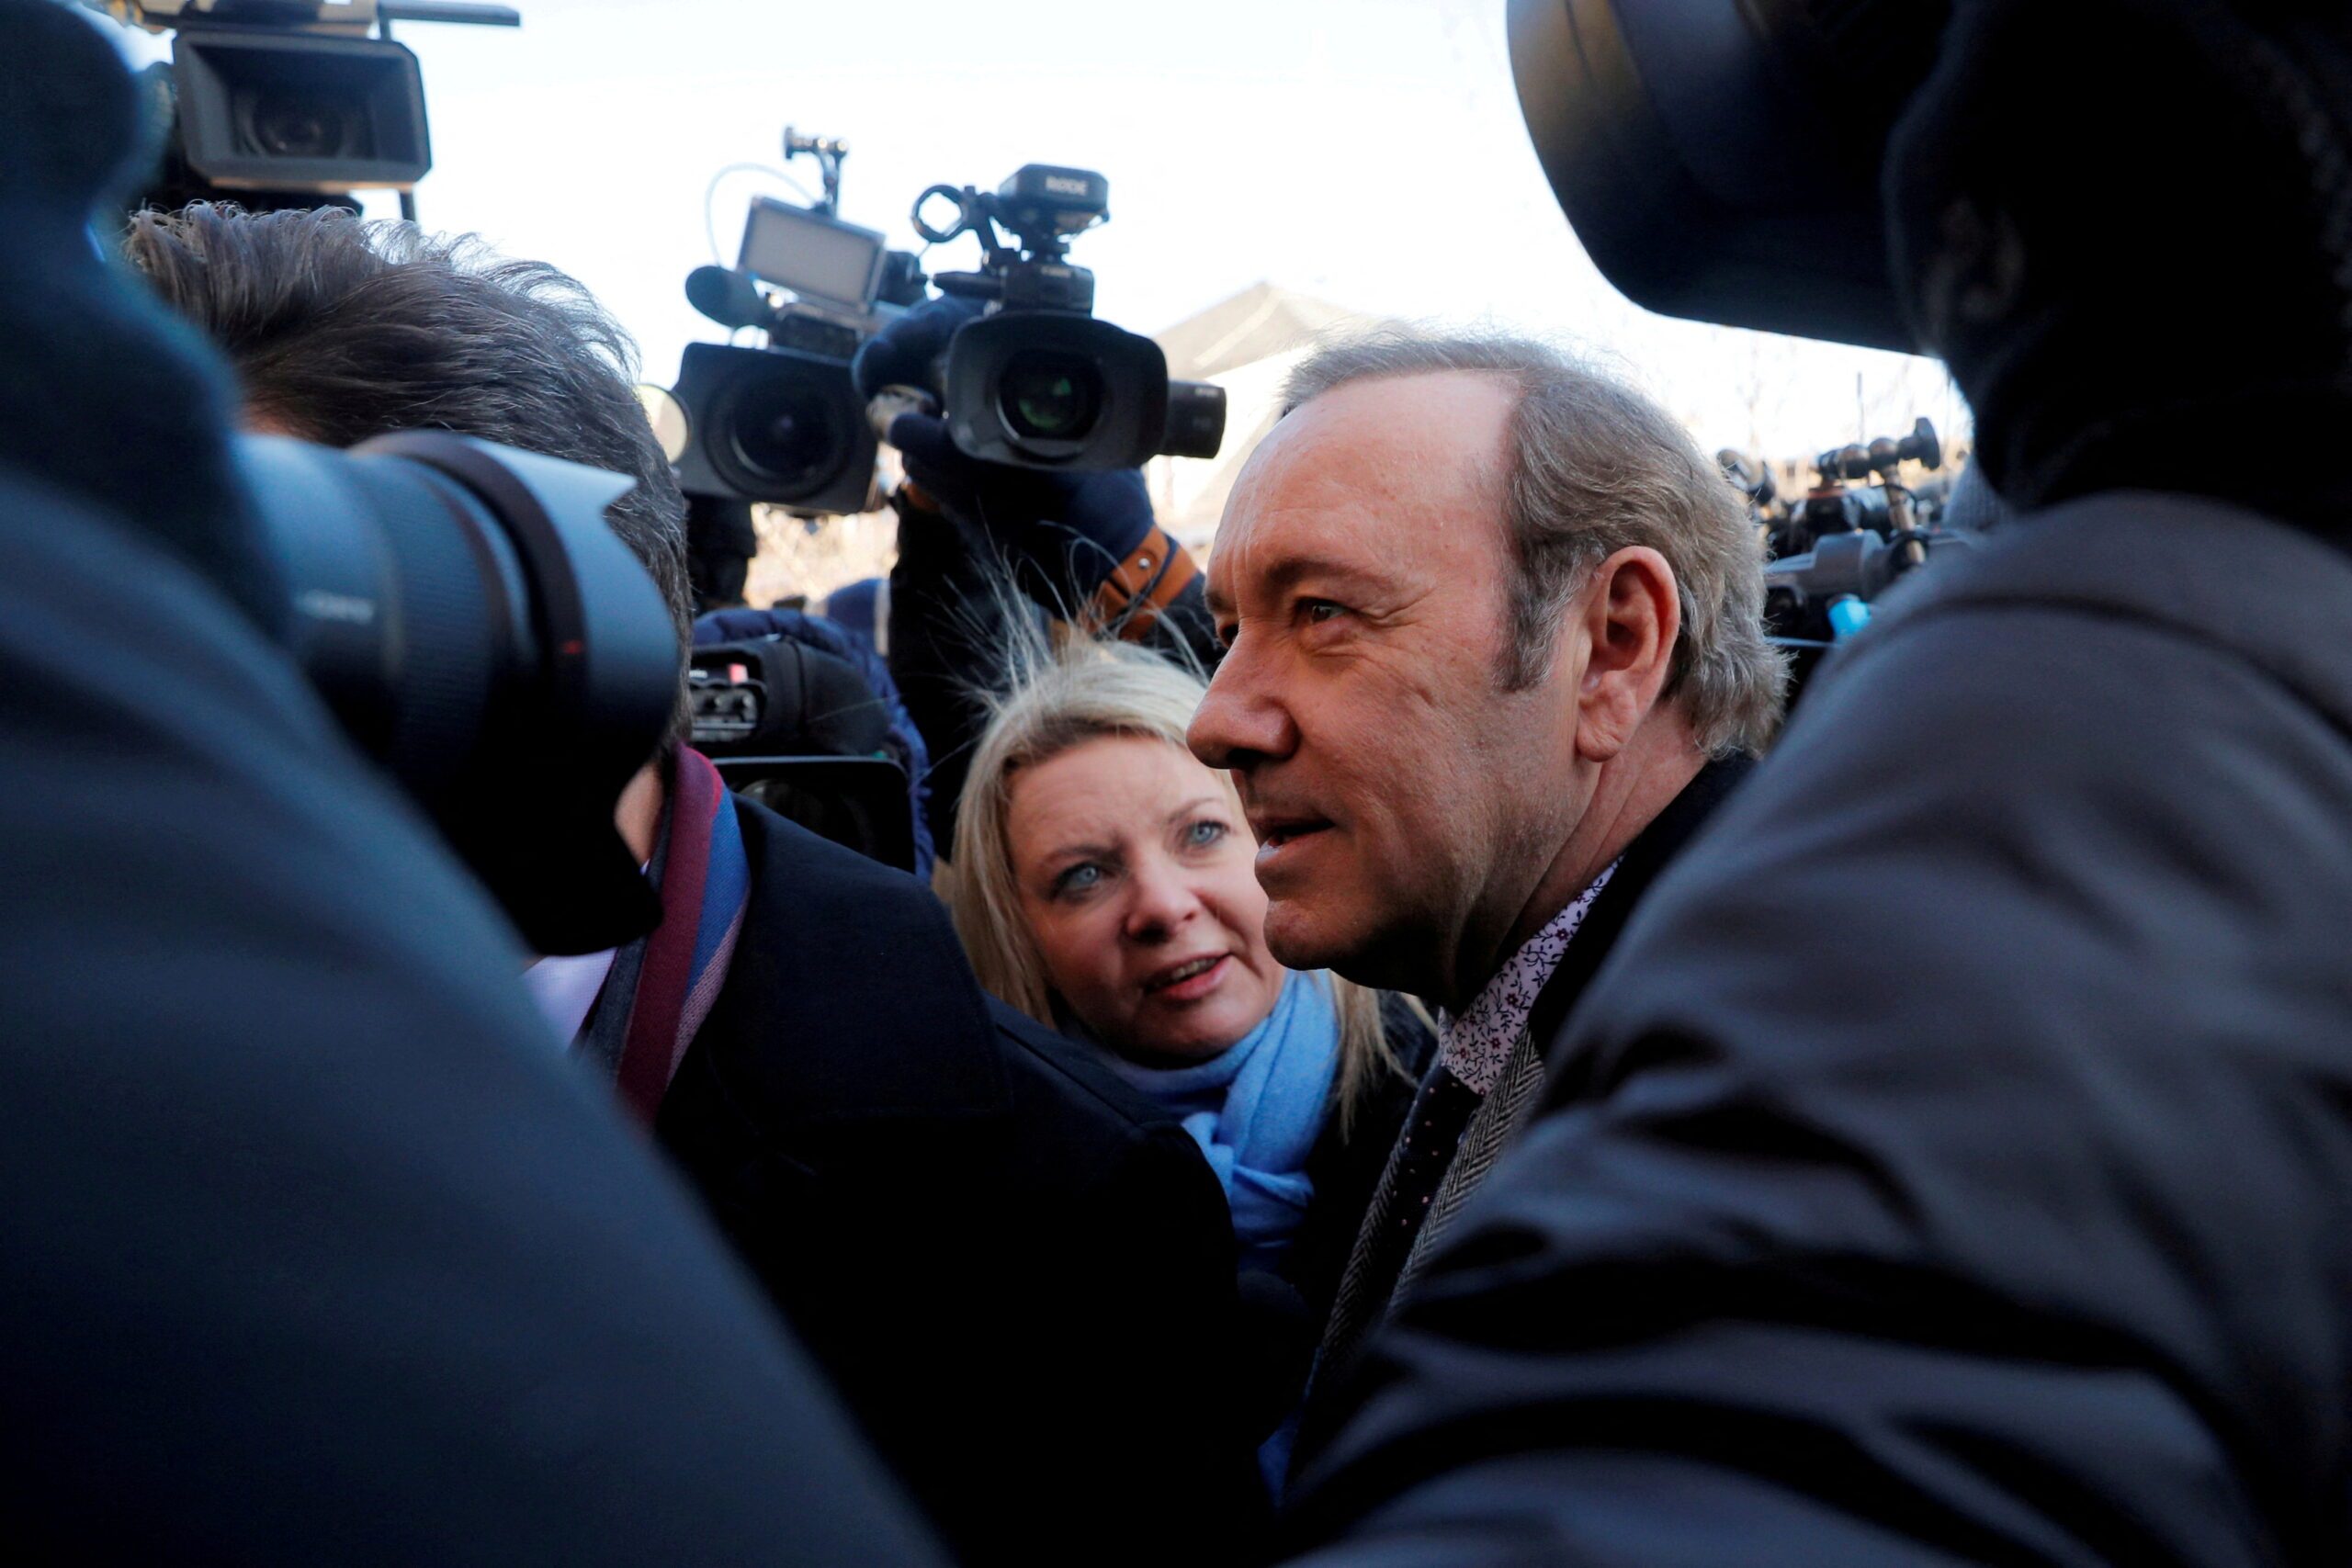 Actor Kevin Spacey due in UK court to face sex assault charges